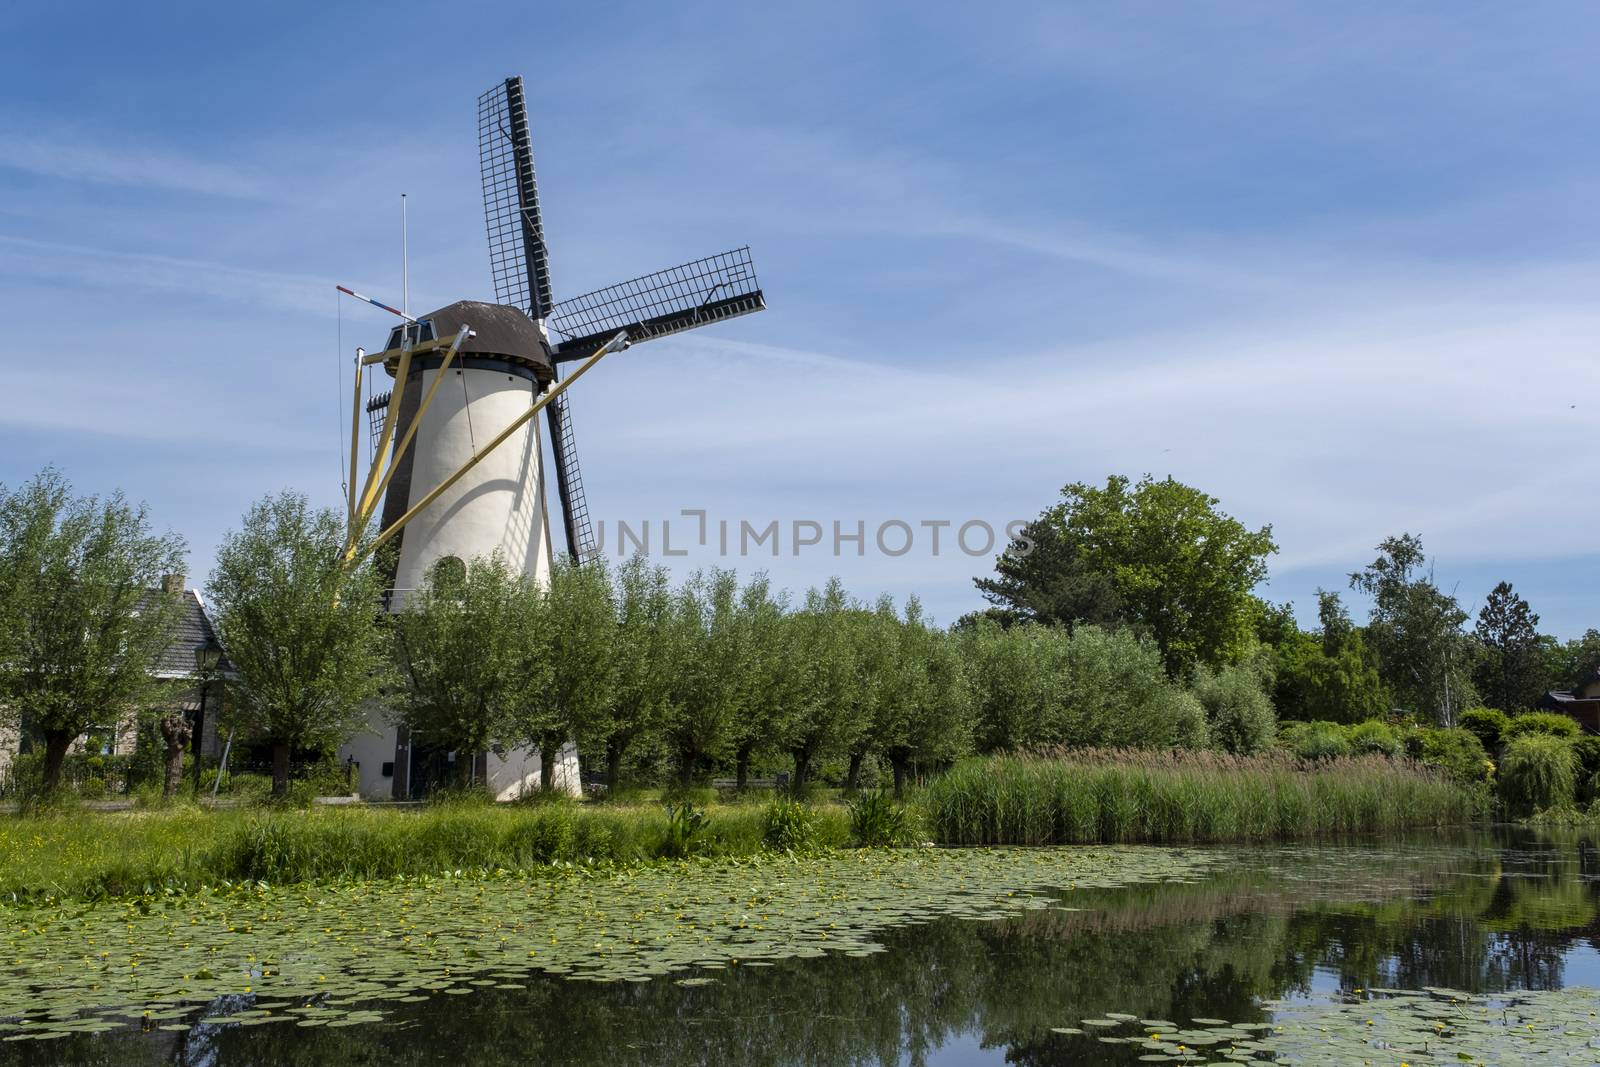 Windmill farm in summer in Netherlands. This wonderful windmill is located near Rotterdam in Holland